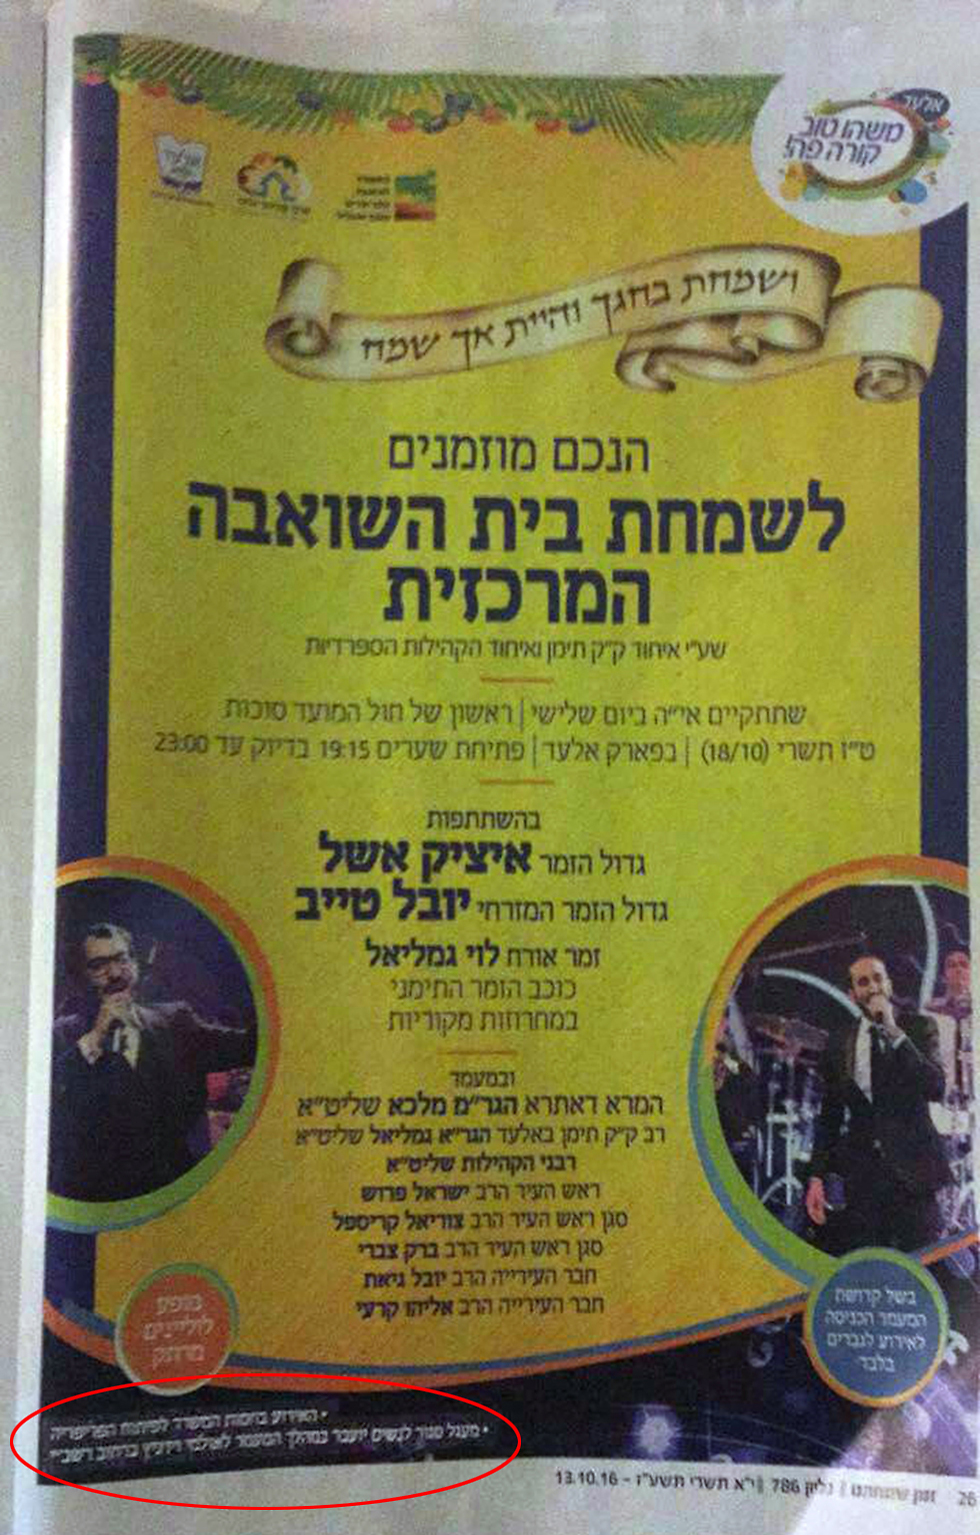 An advertisement for the state-funded celebration in Elad, marked at the bottom as not open to women